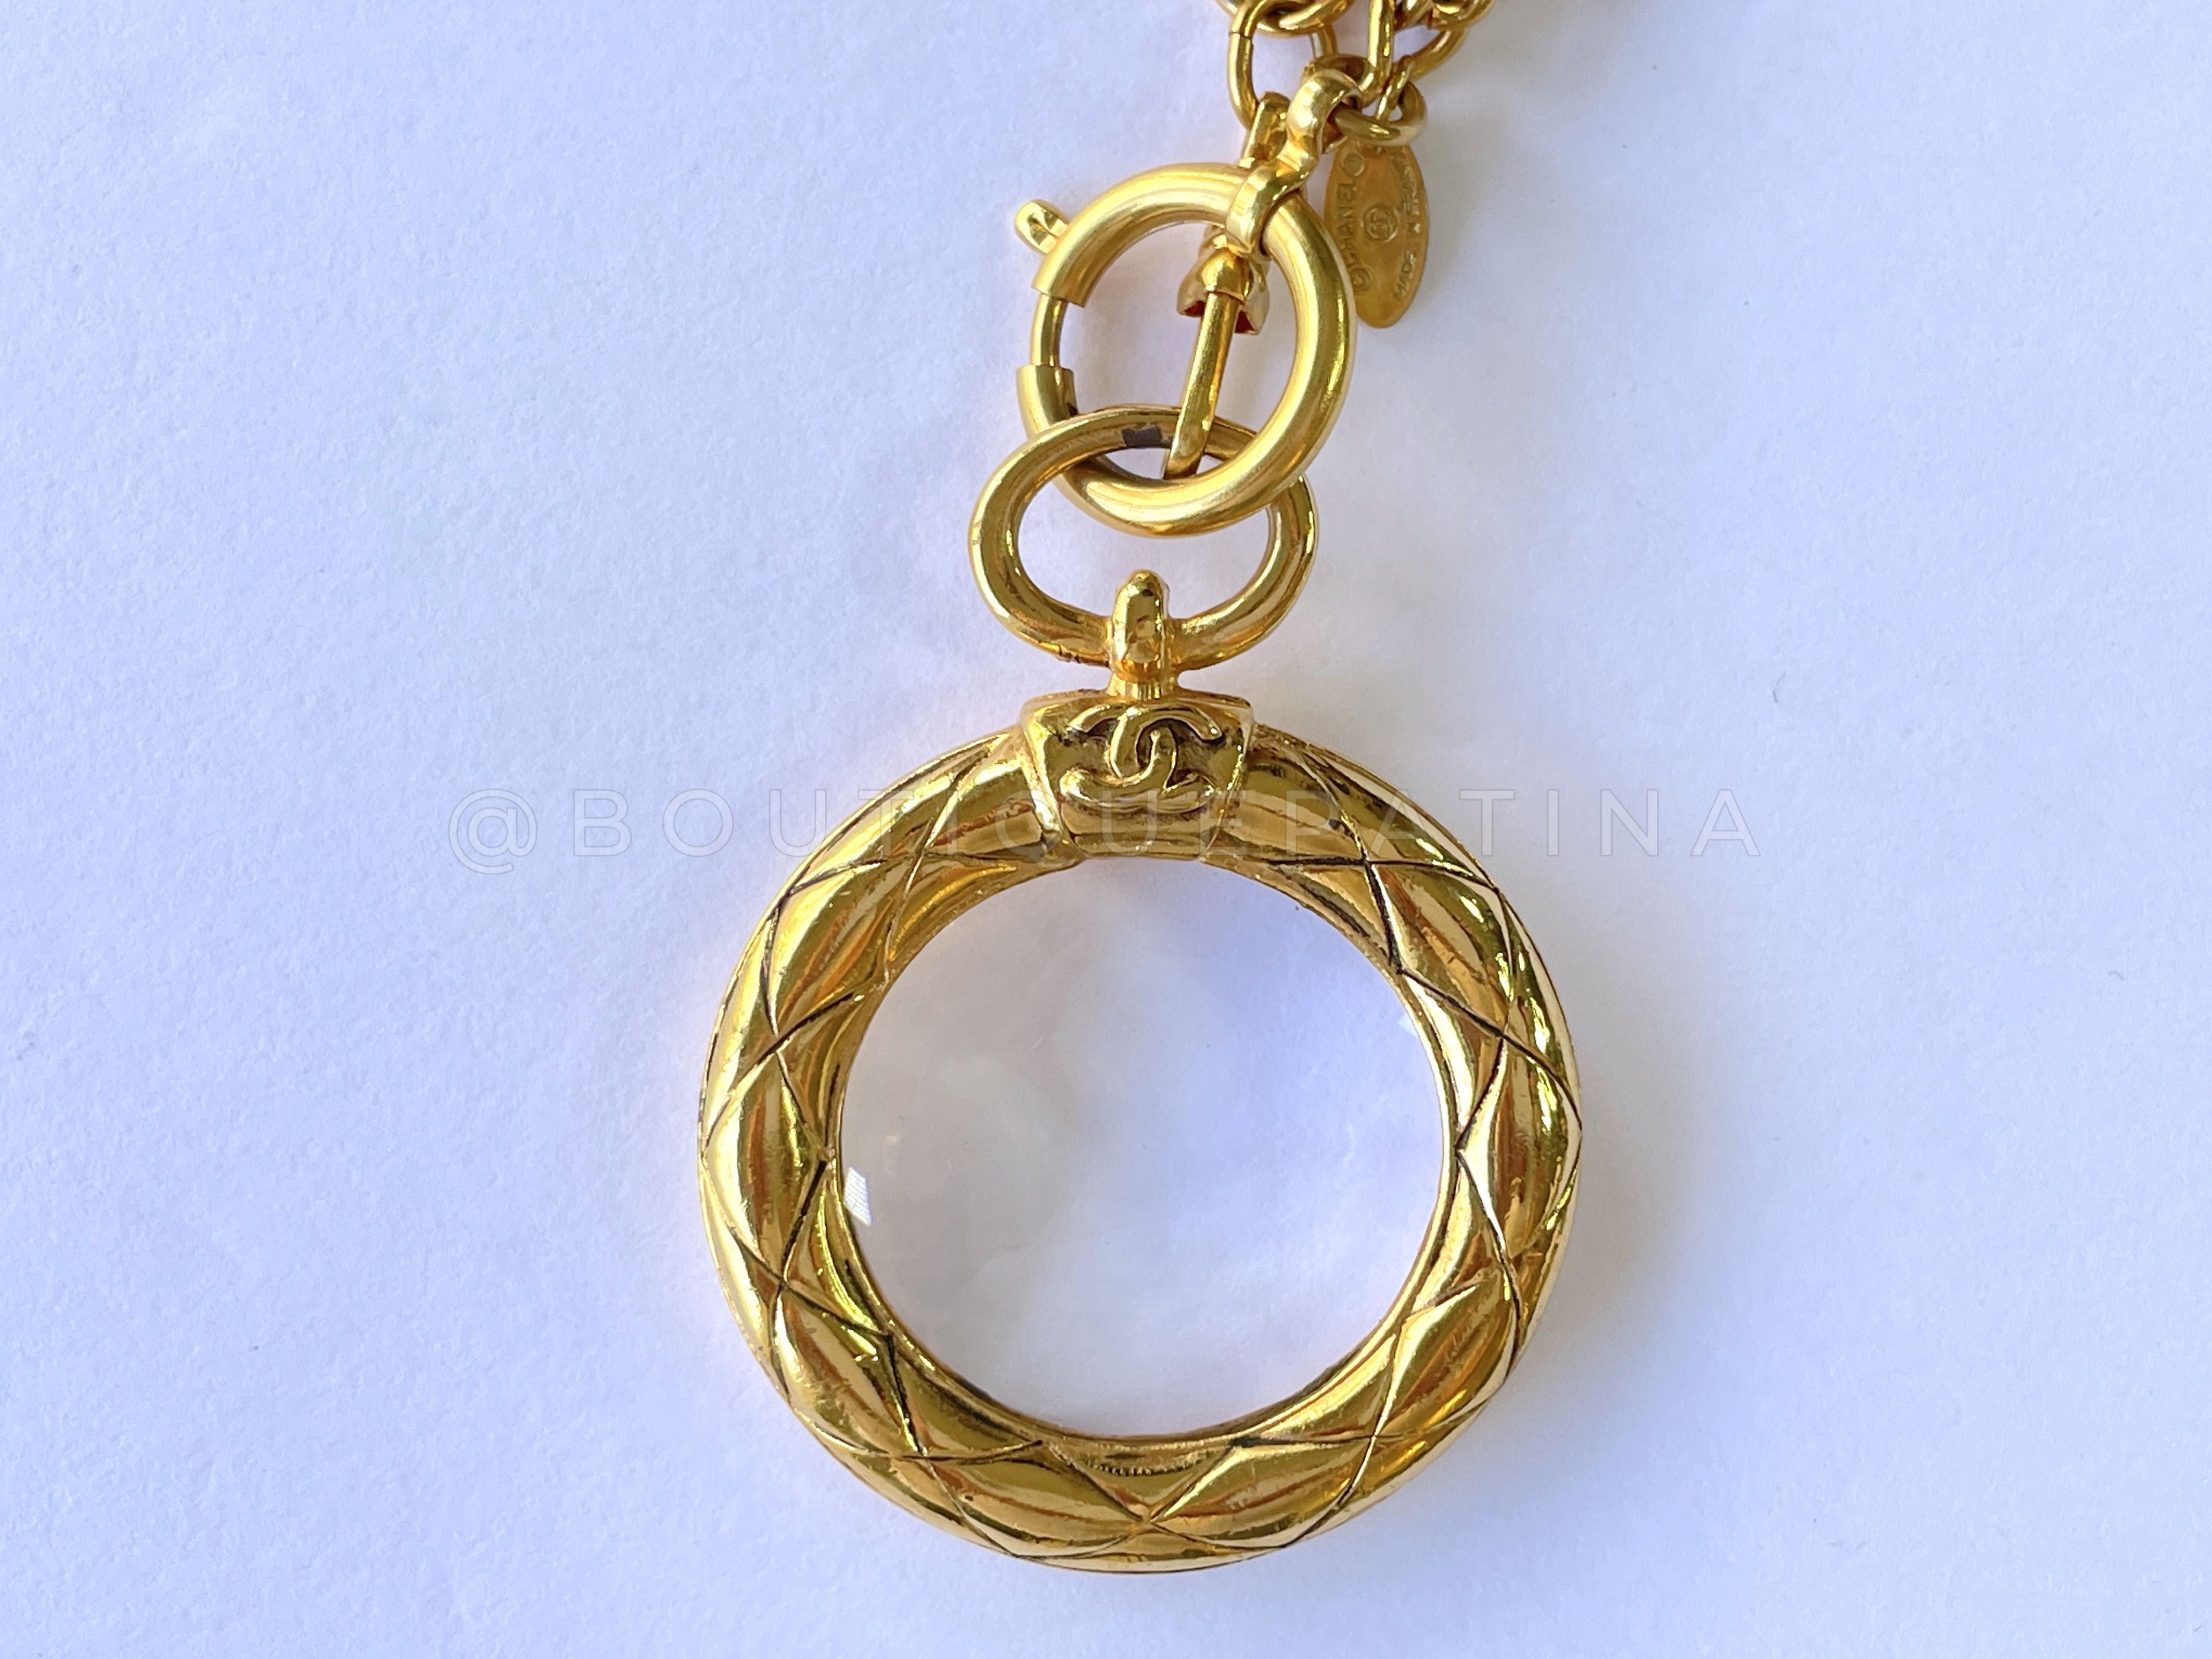 Chanel Vintage Classic Quilted Framed Magnifying Glass Pendant Long Necklace